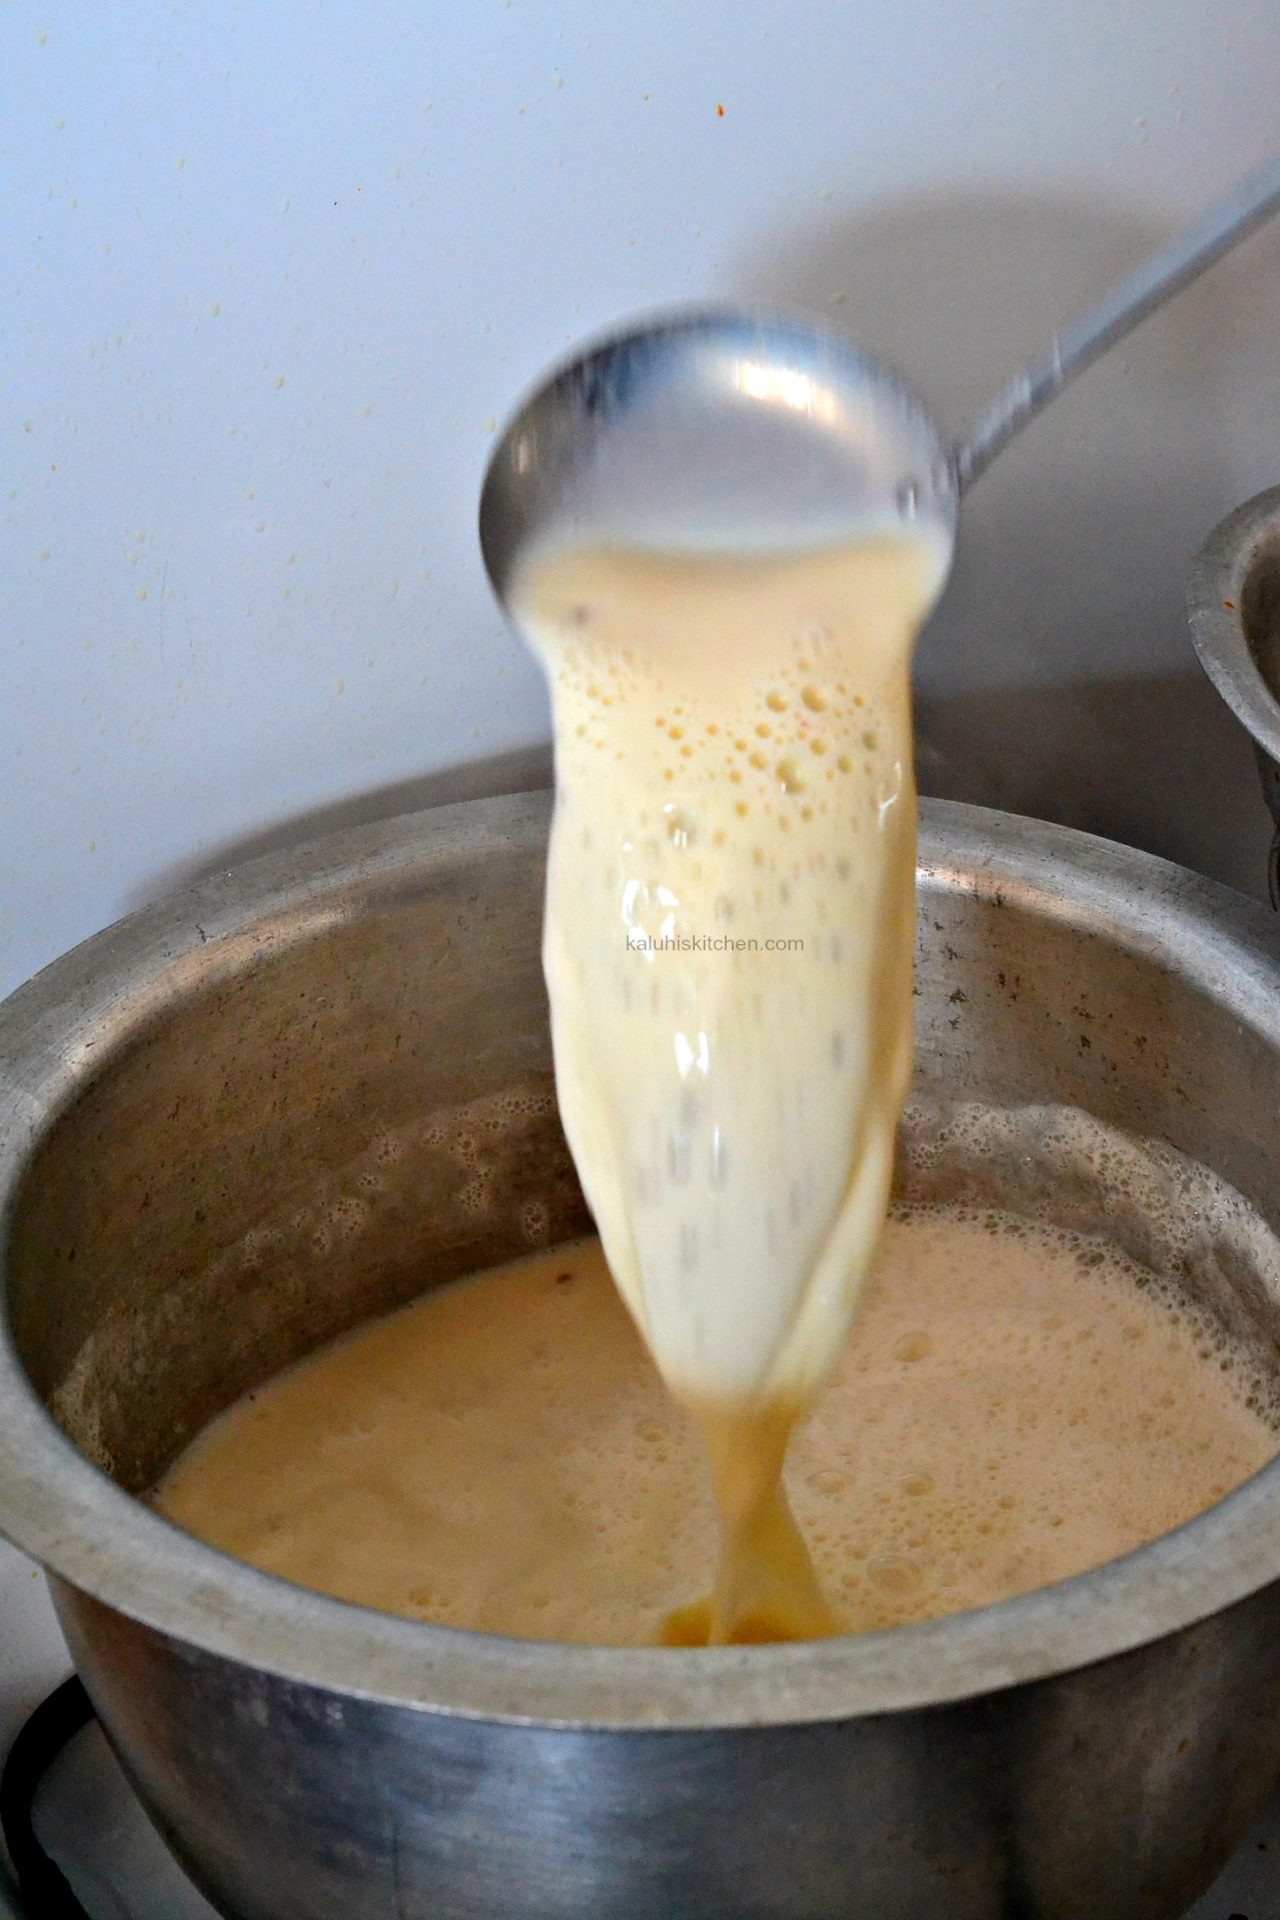 mix the milk with the agar agar thoroughly so that it is evenly distributed_kaluhiskitchen.com_lamu food festival